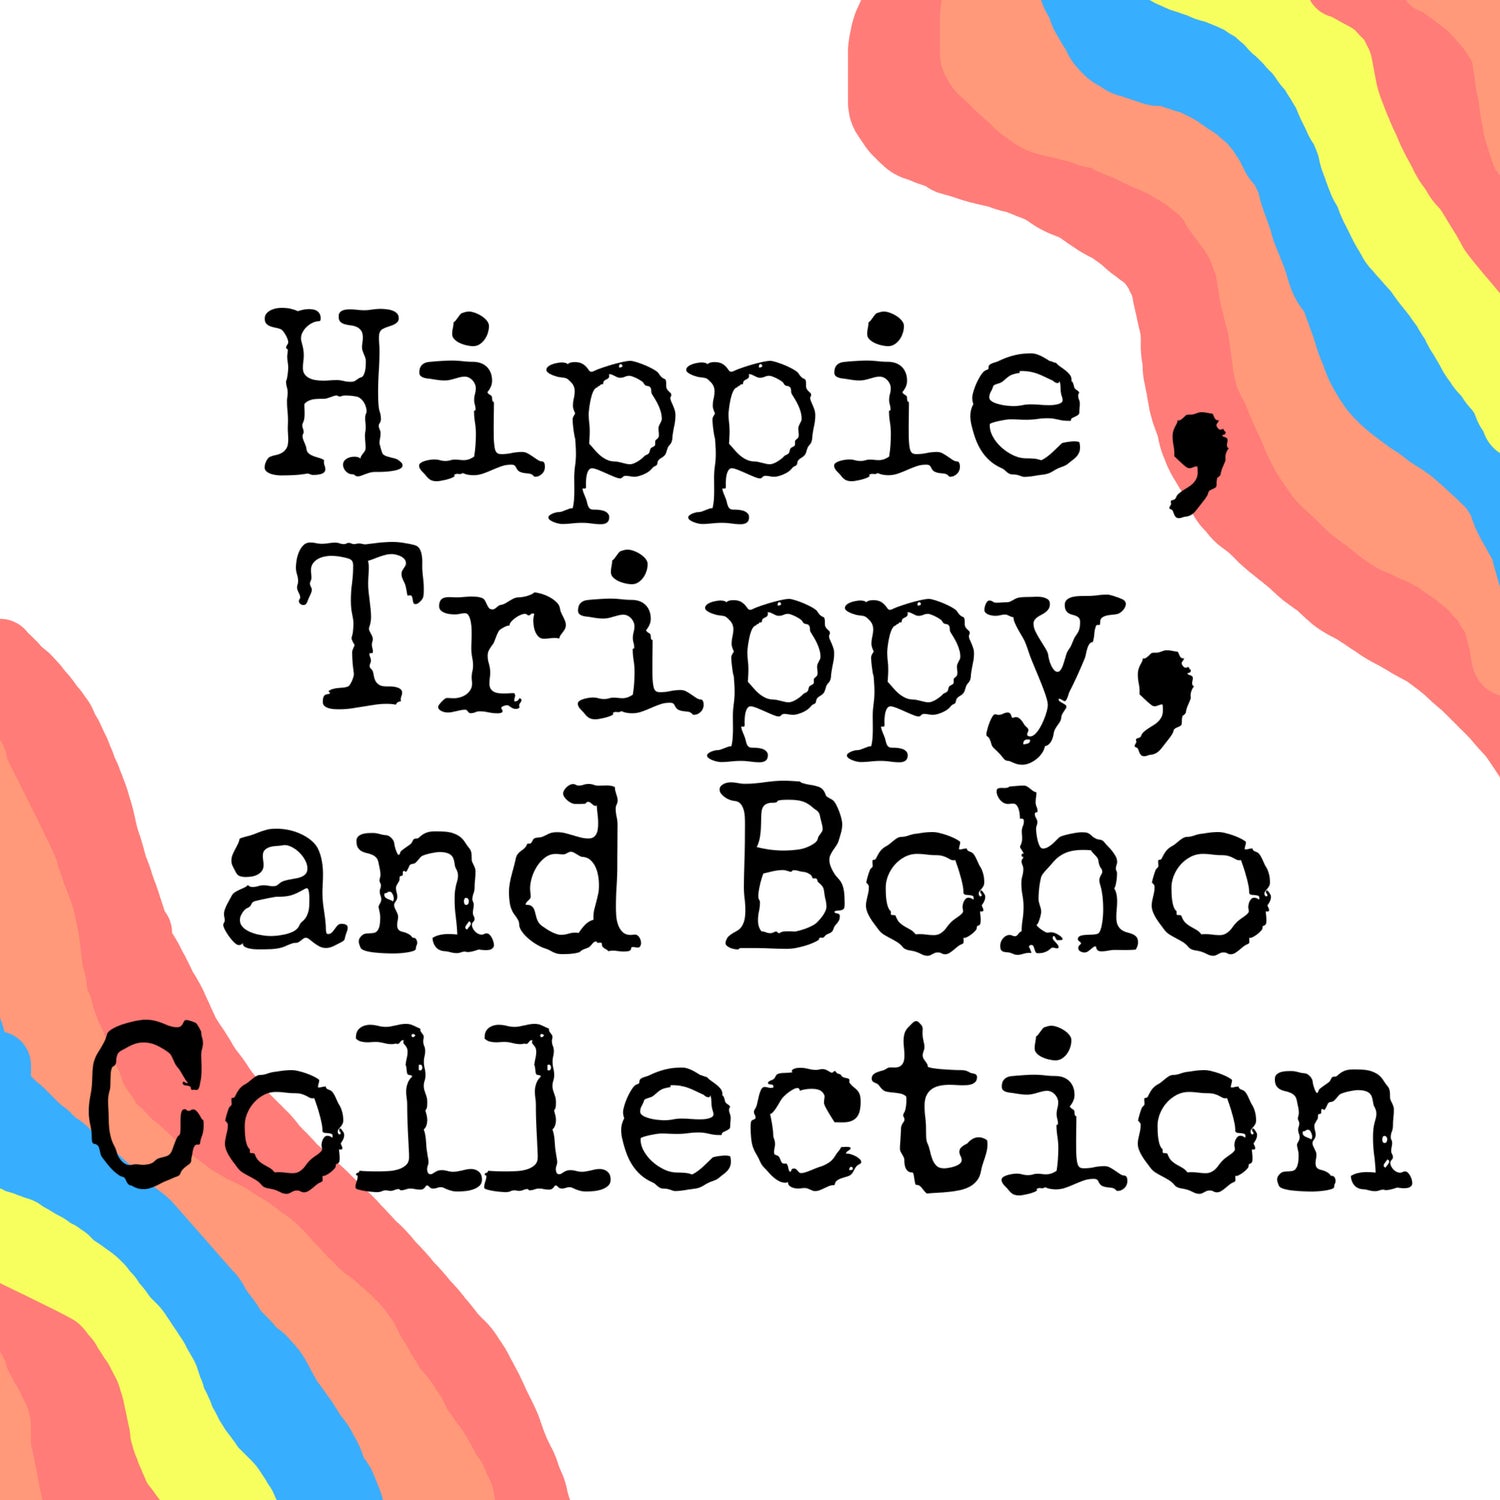 Hippie, Trippy and Boho Collection